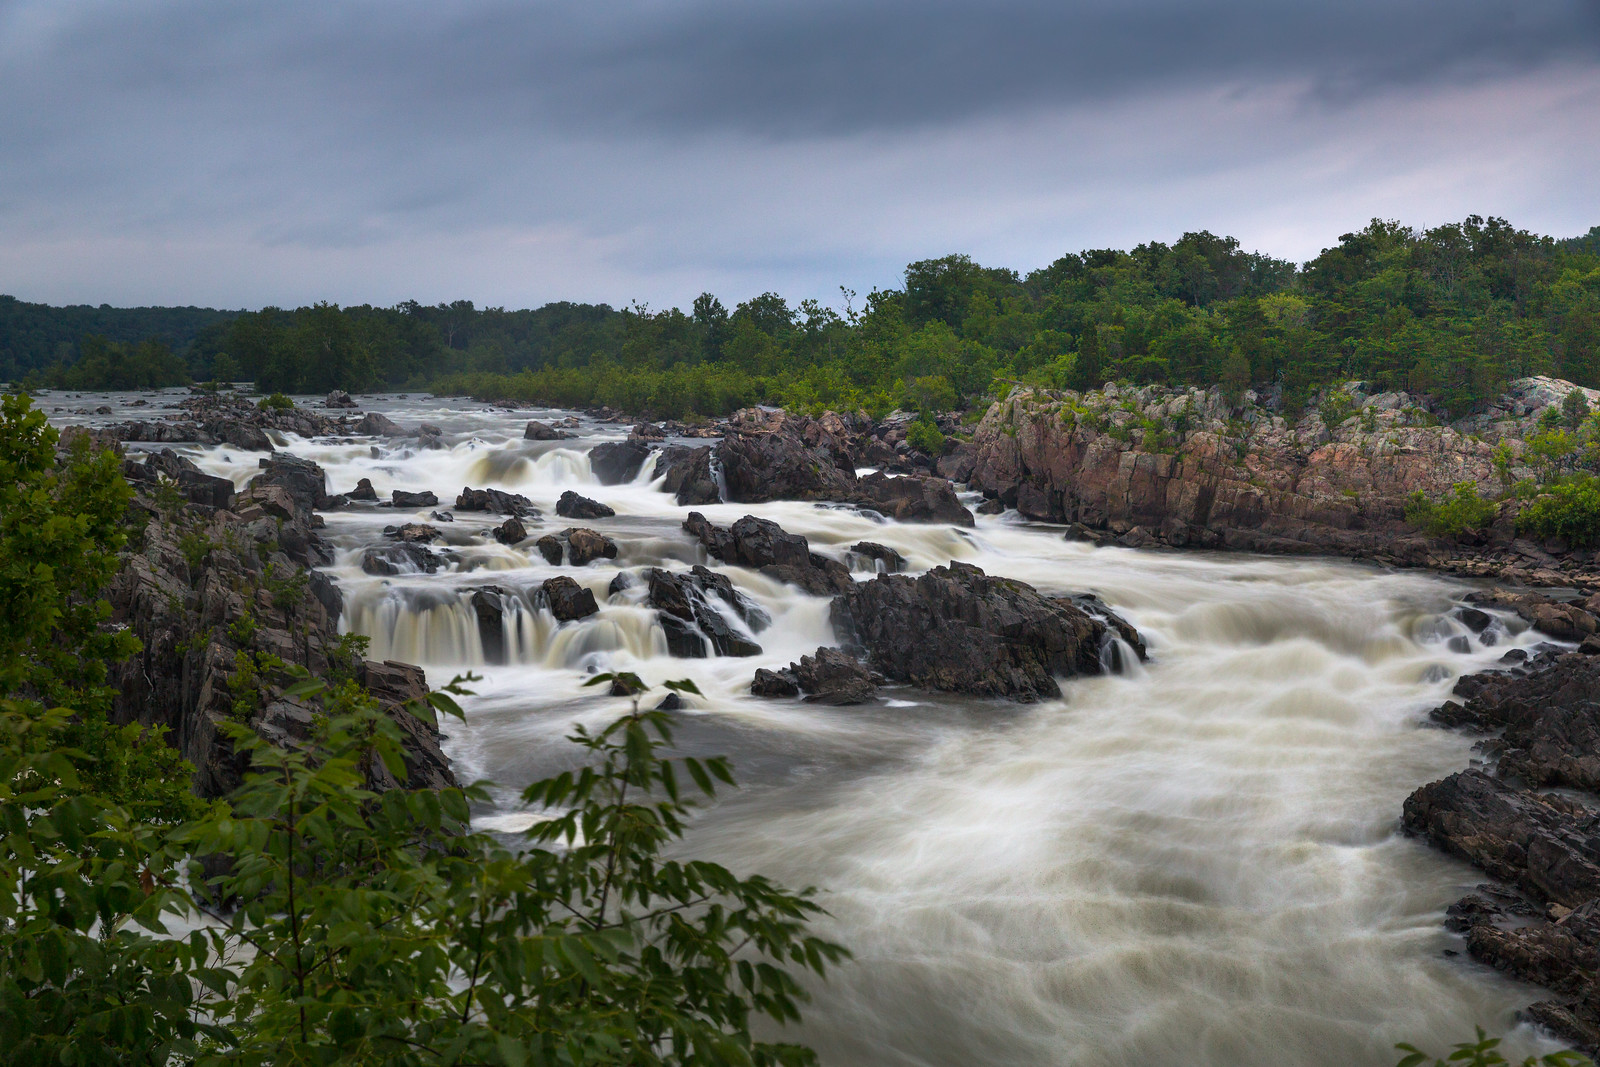 Morning Rain over the Great Falls